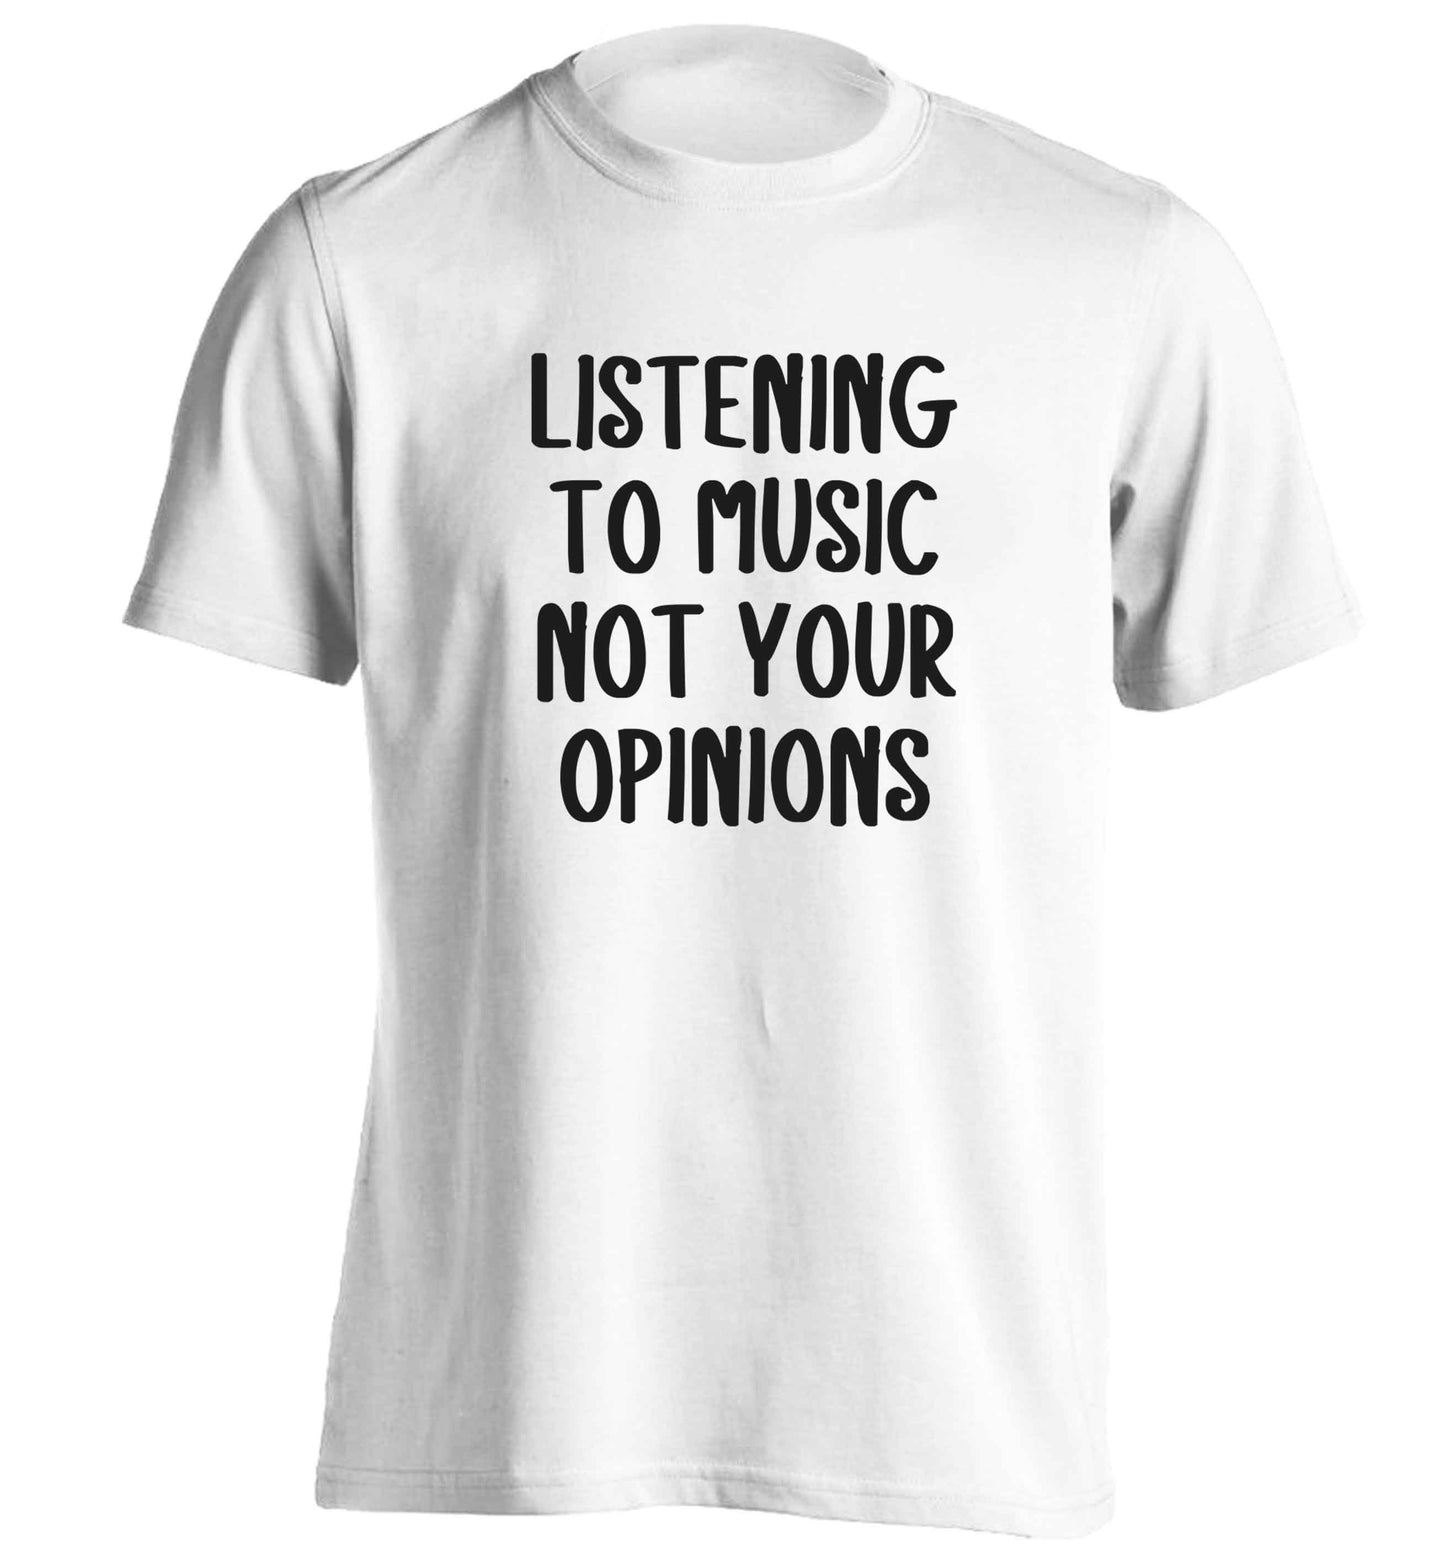 Listening to music not your opinions adults unisex white Tshirt 2XL